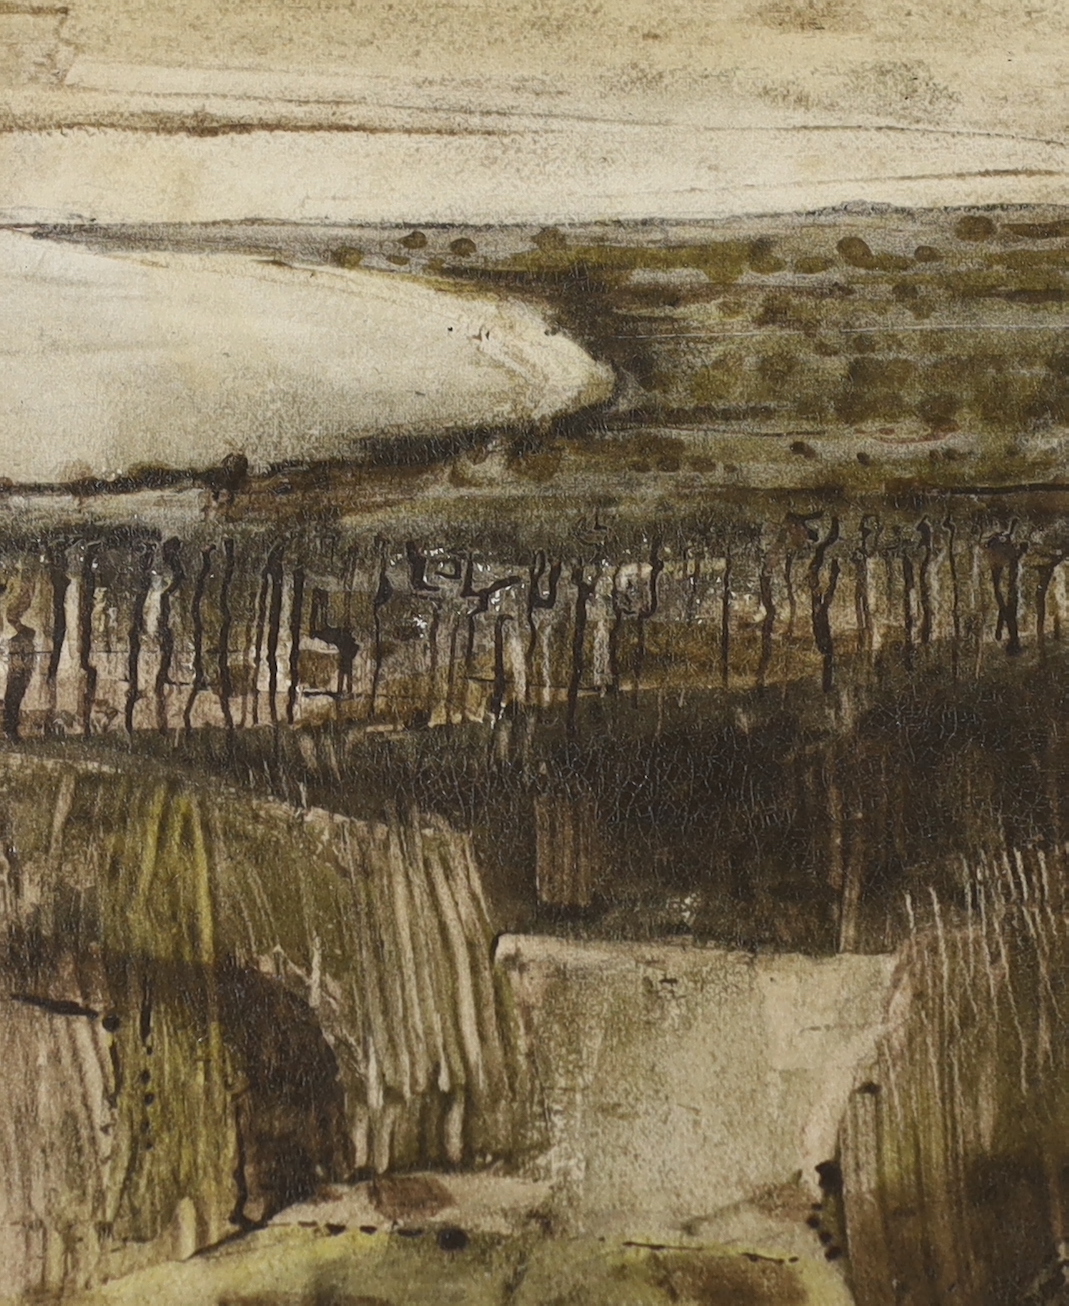 David Holt (mid 20th century) Cliff walk, Lympne, mixed media, signed and dated ‘62, 22.5 x 18.5 cm